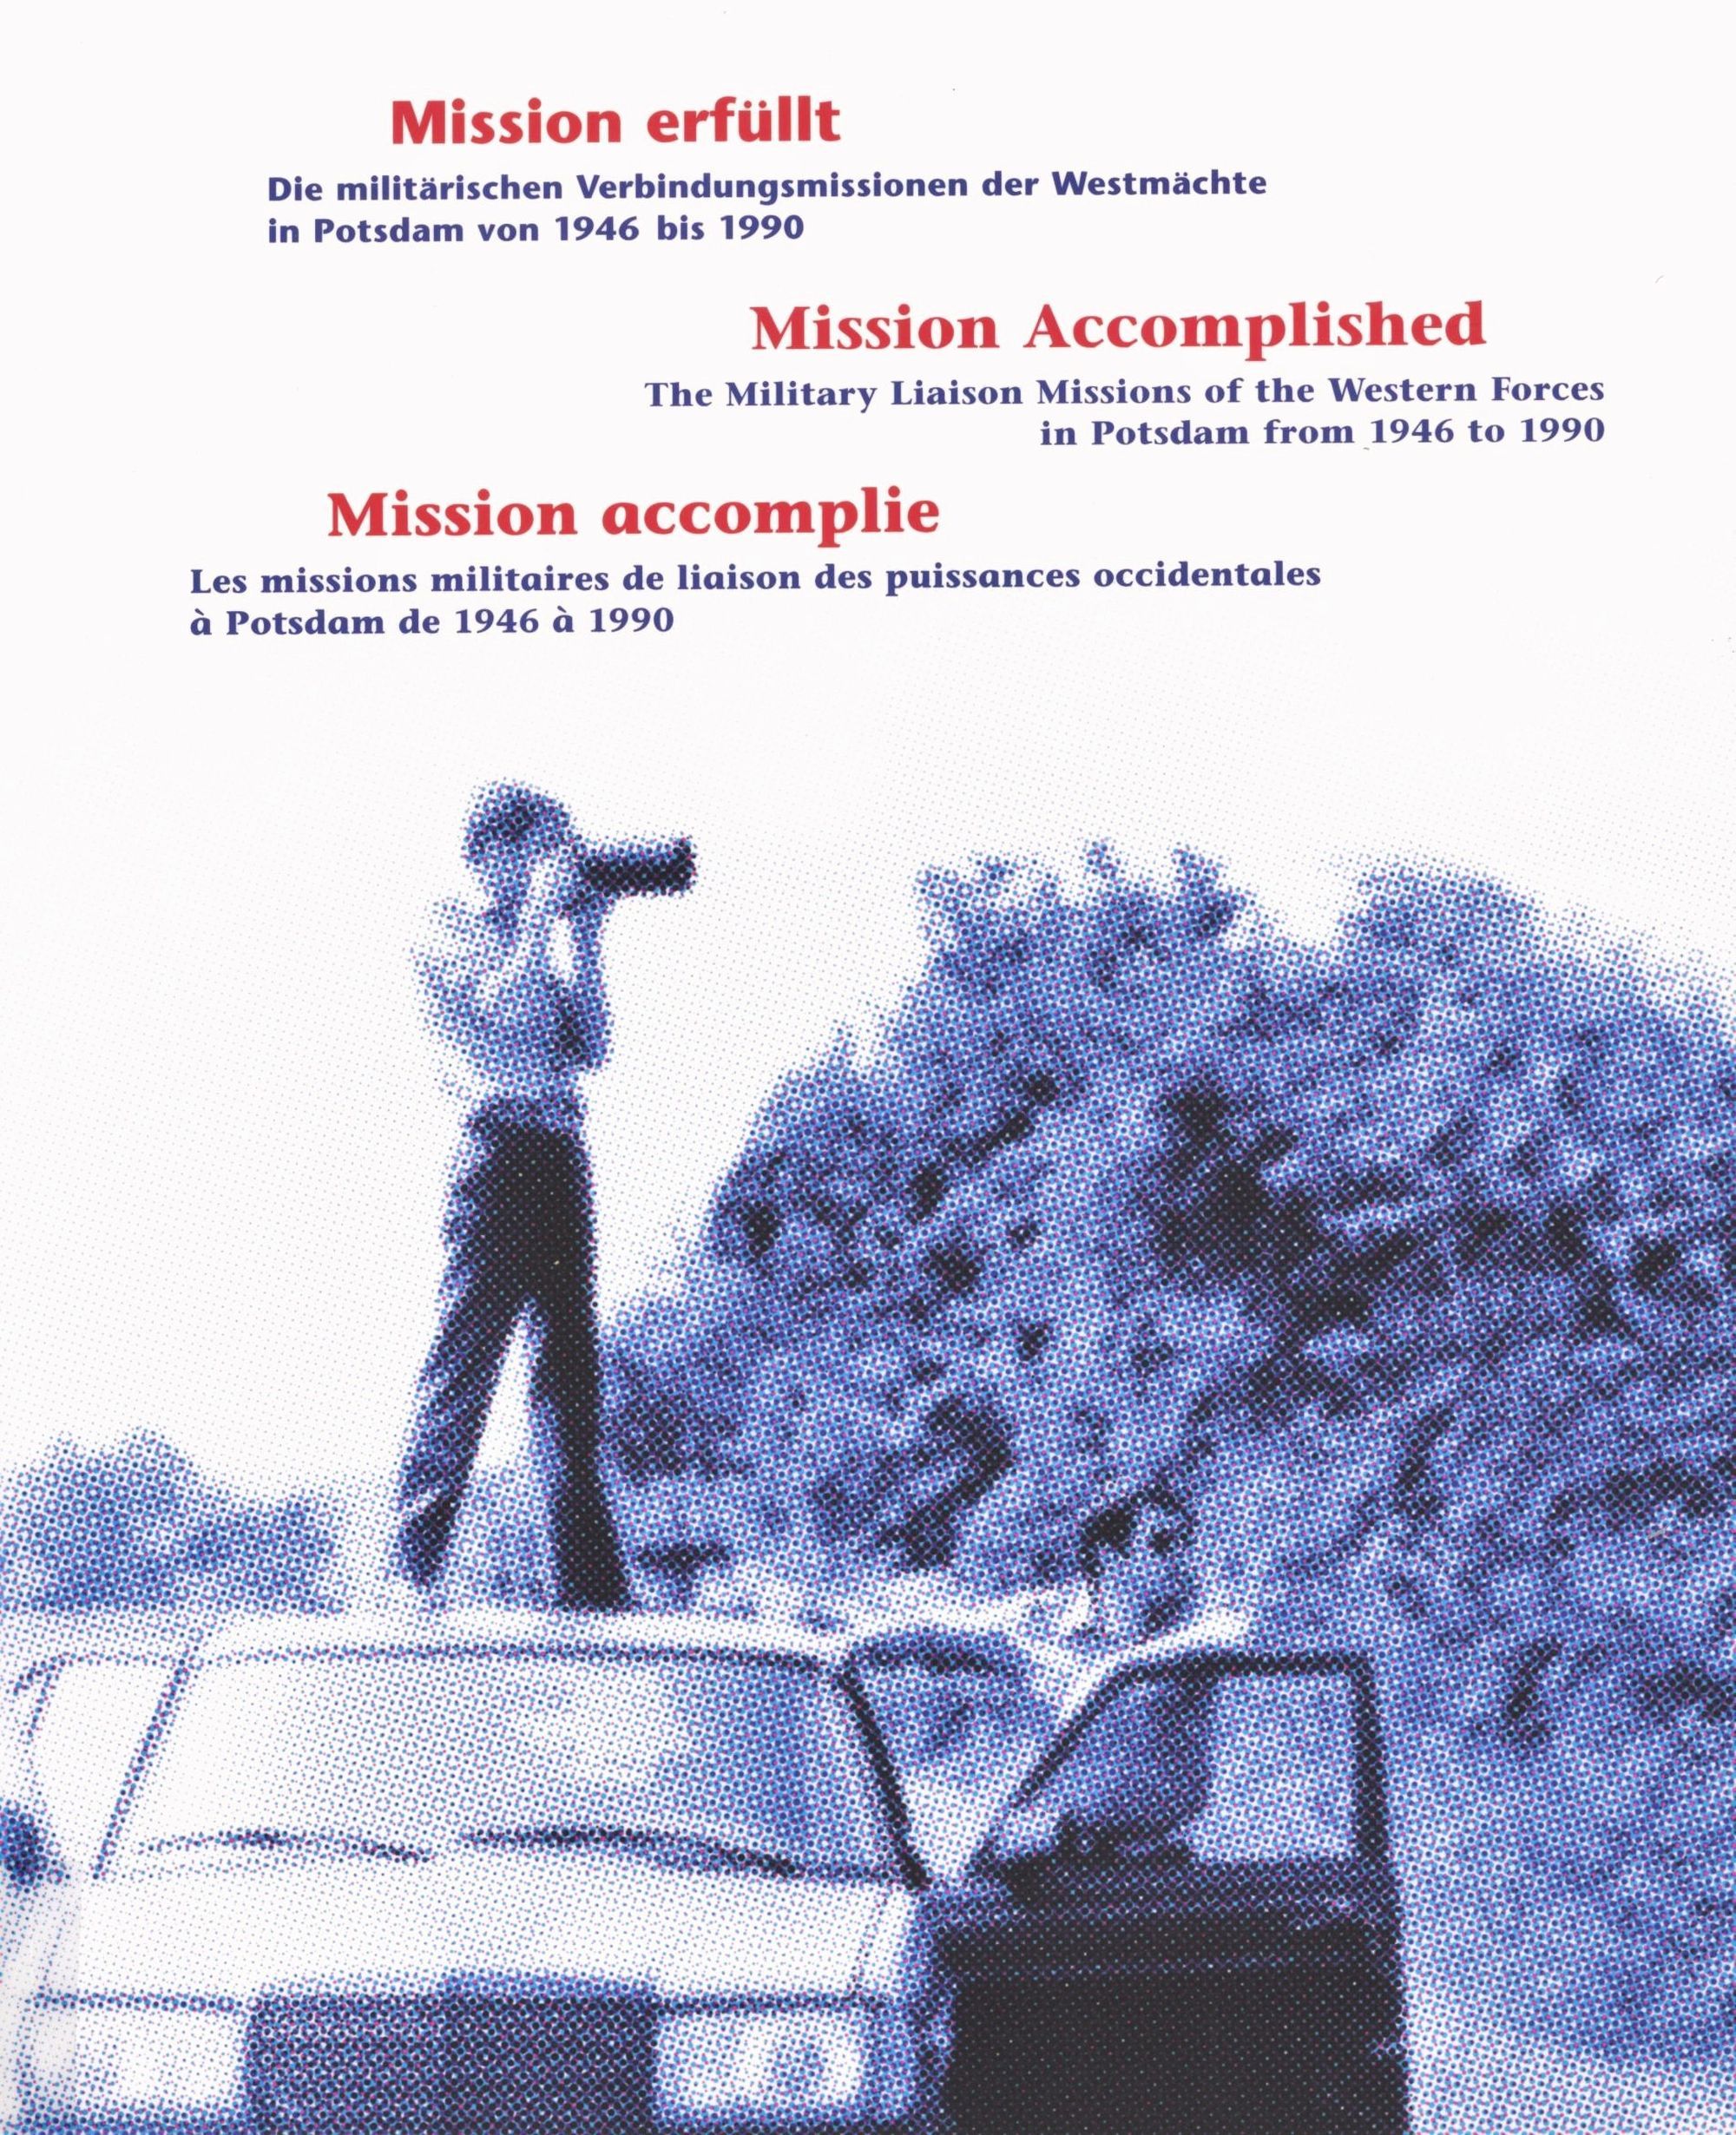 Mission Accomplished: The Military Liaison Missions of the Western Forces in Potsdam from 1946 to 1990